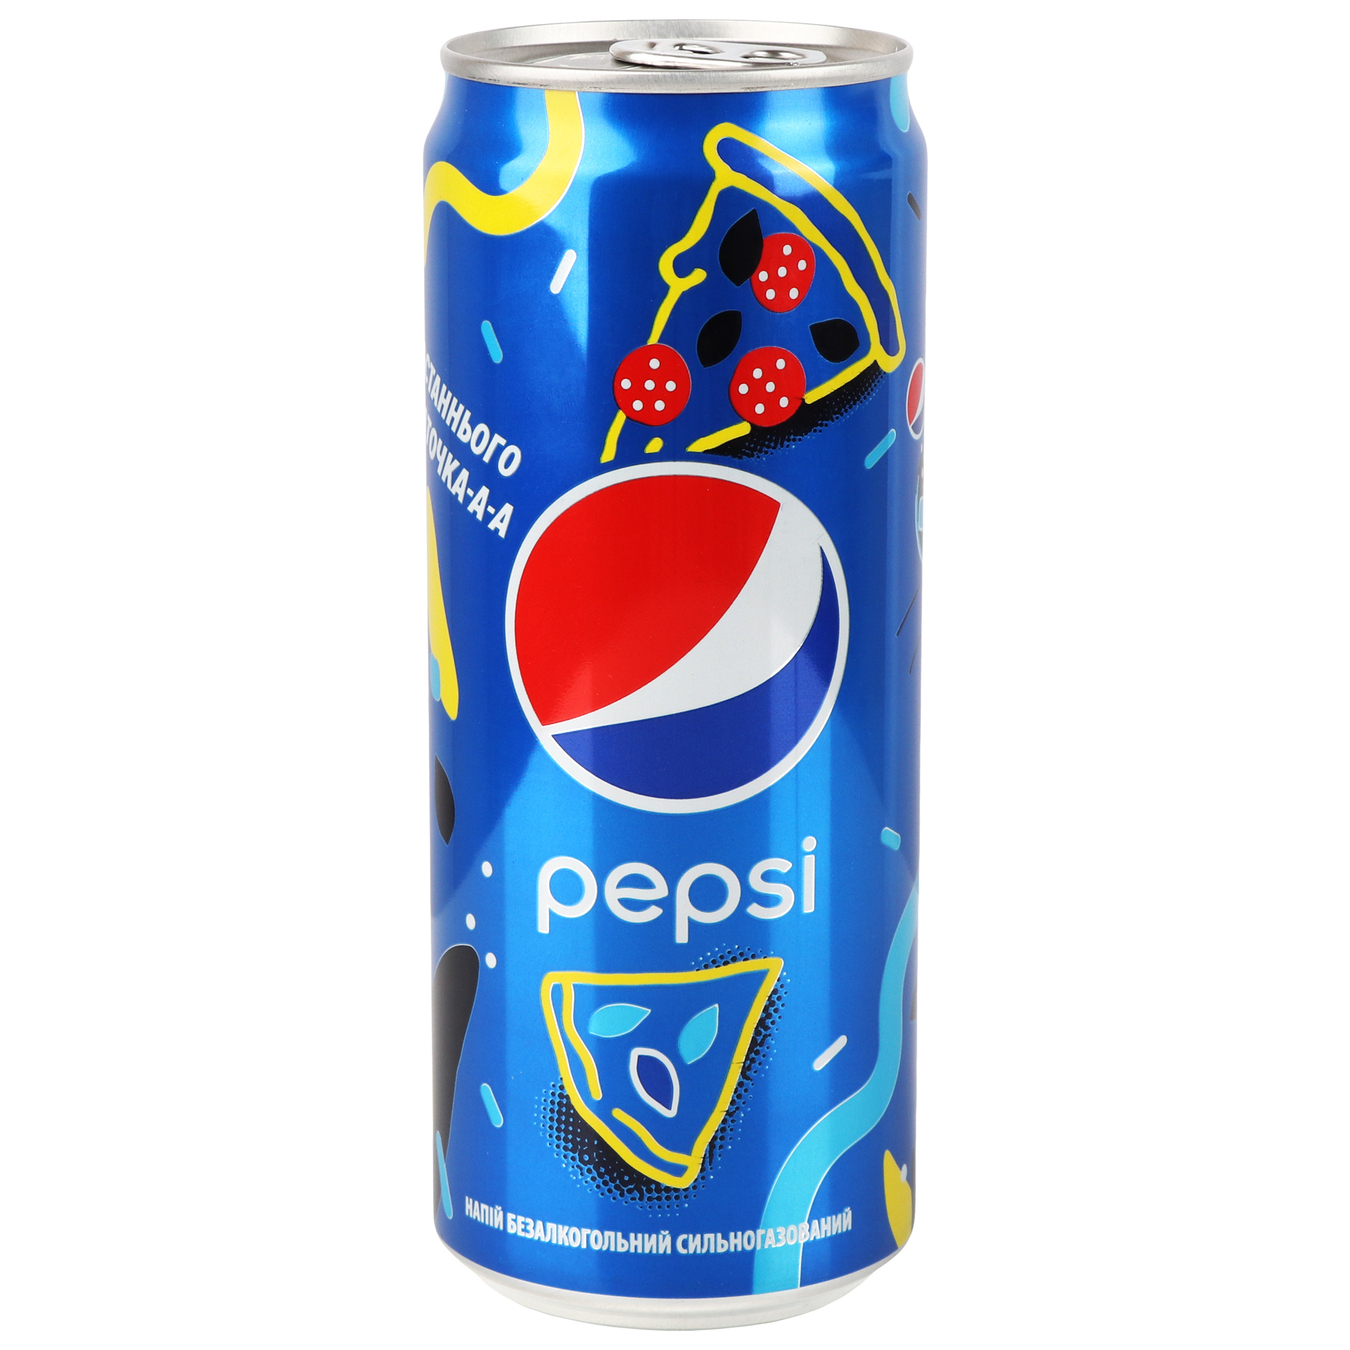 Pepsi carbonated drink 330ml can 6